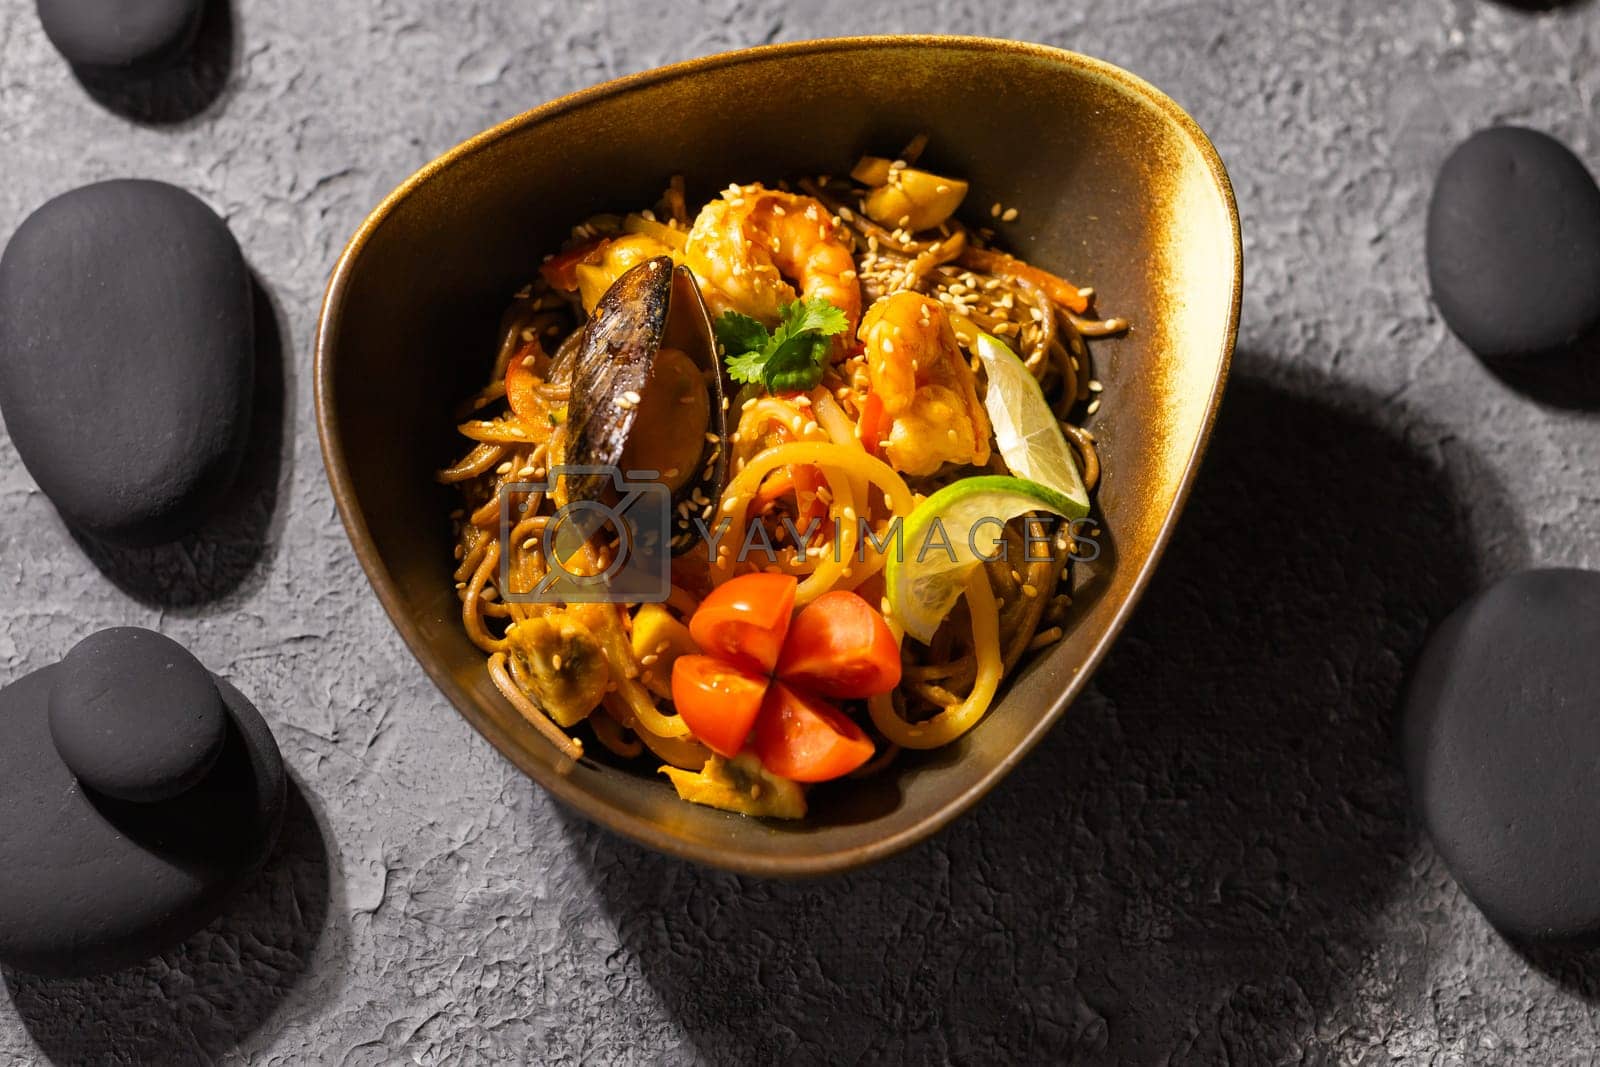 Royalty free image of Udon stir-fry noodles with mussels and shrimp. Asian cuisine by Satura86